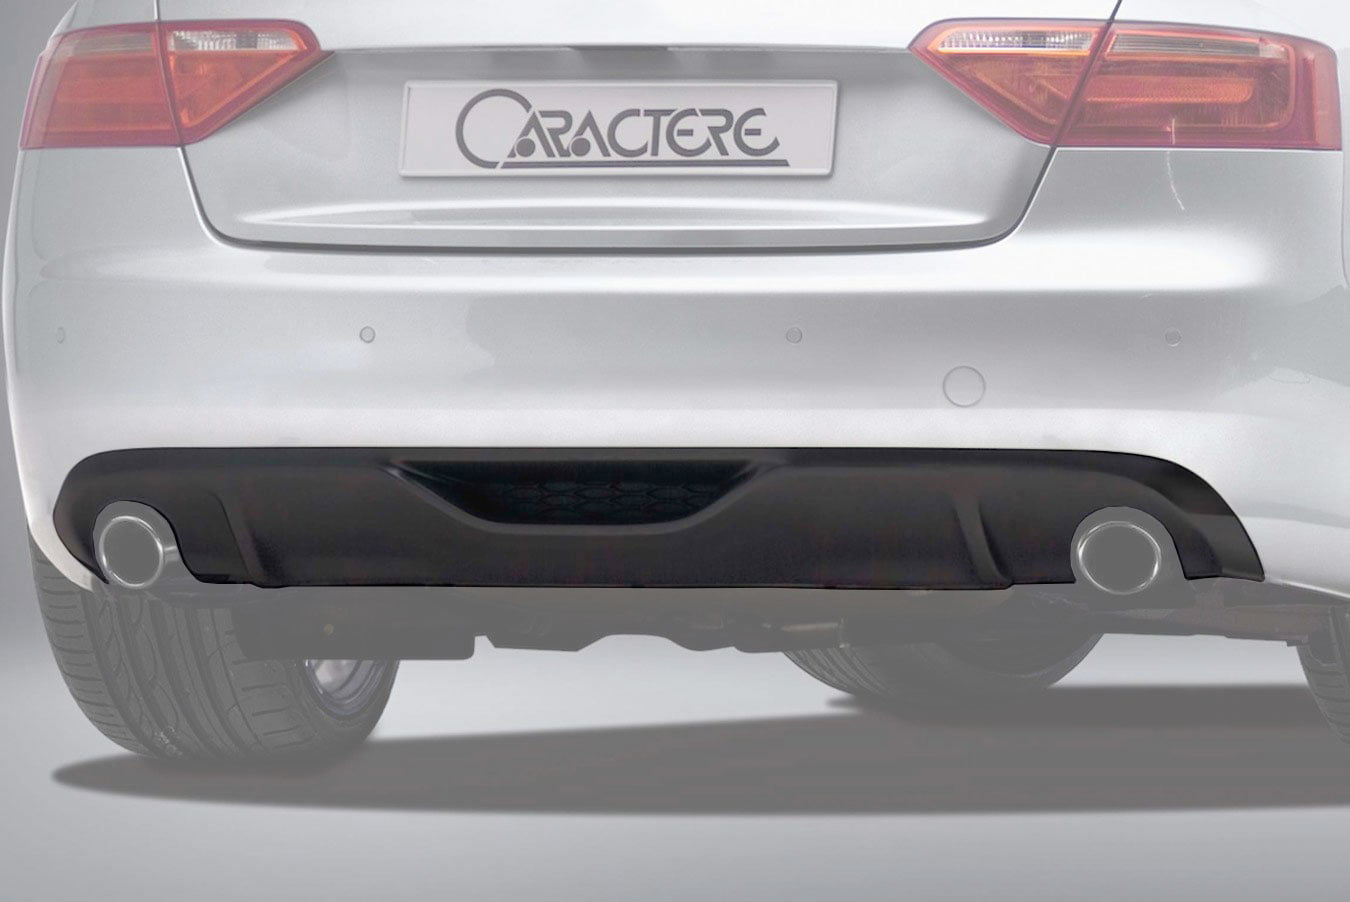 Caractere Rear Diffuser With 2 Cuttings For Single Exhaust Pipe Fits Audi A5 B8 0 2 7 3 0 Tdi 3 2 V6 Bk Motorsport